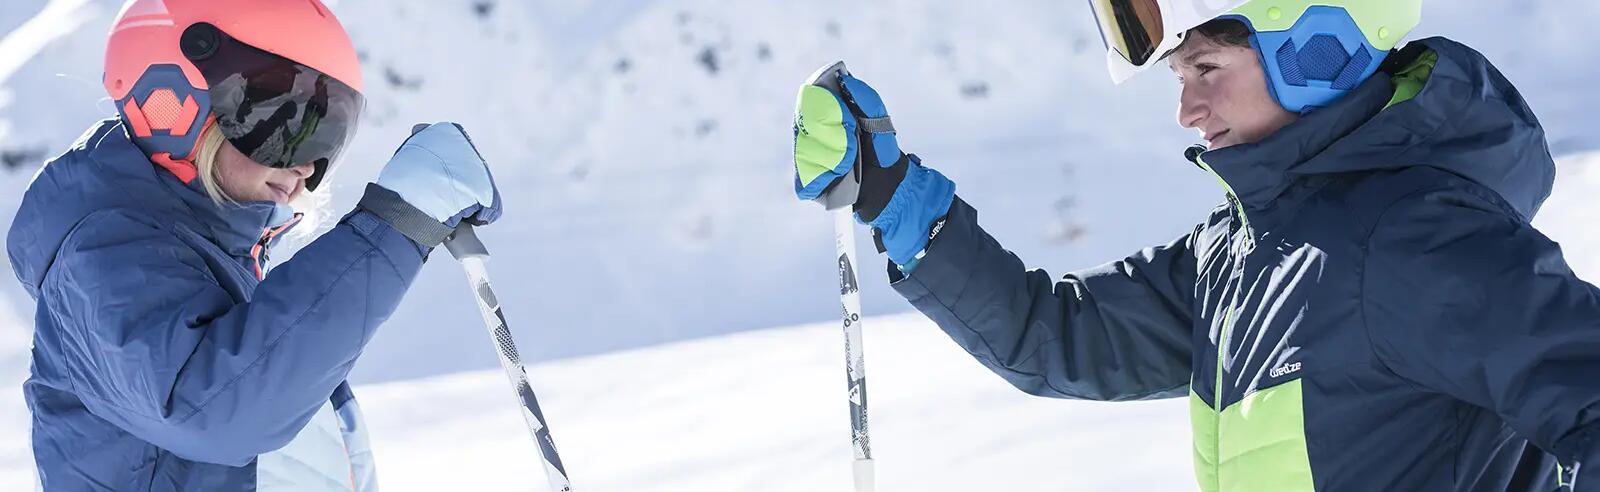 Wedze provides its advice for warm hands when skiing